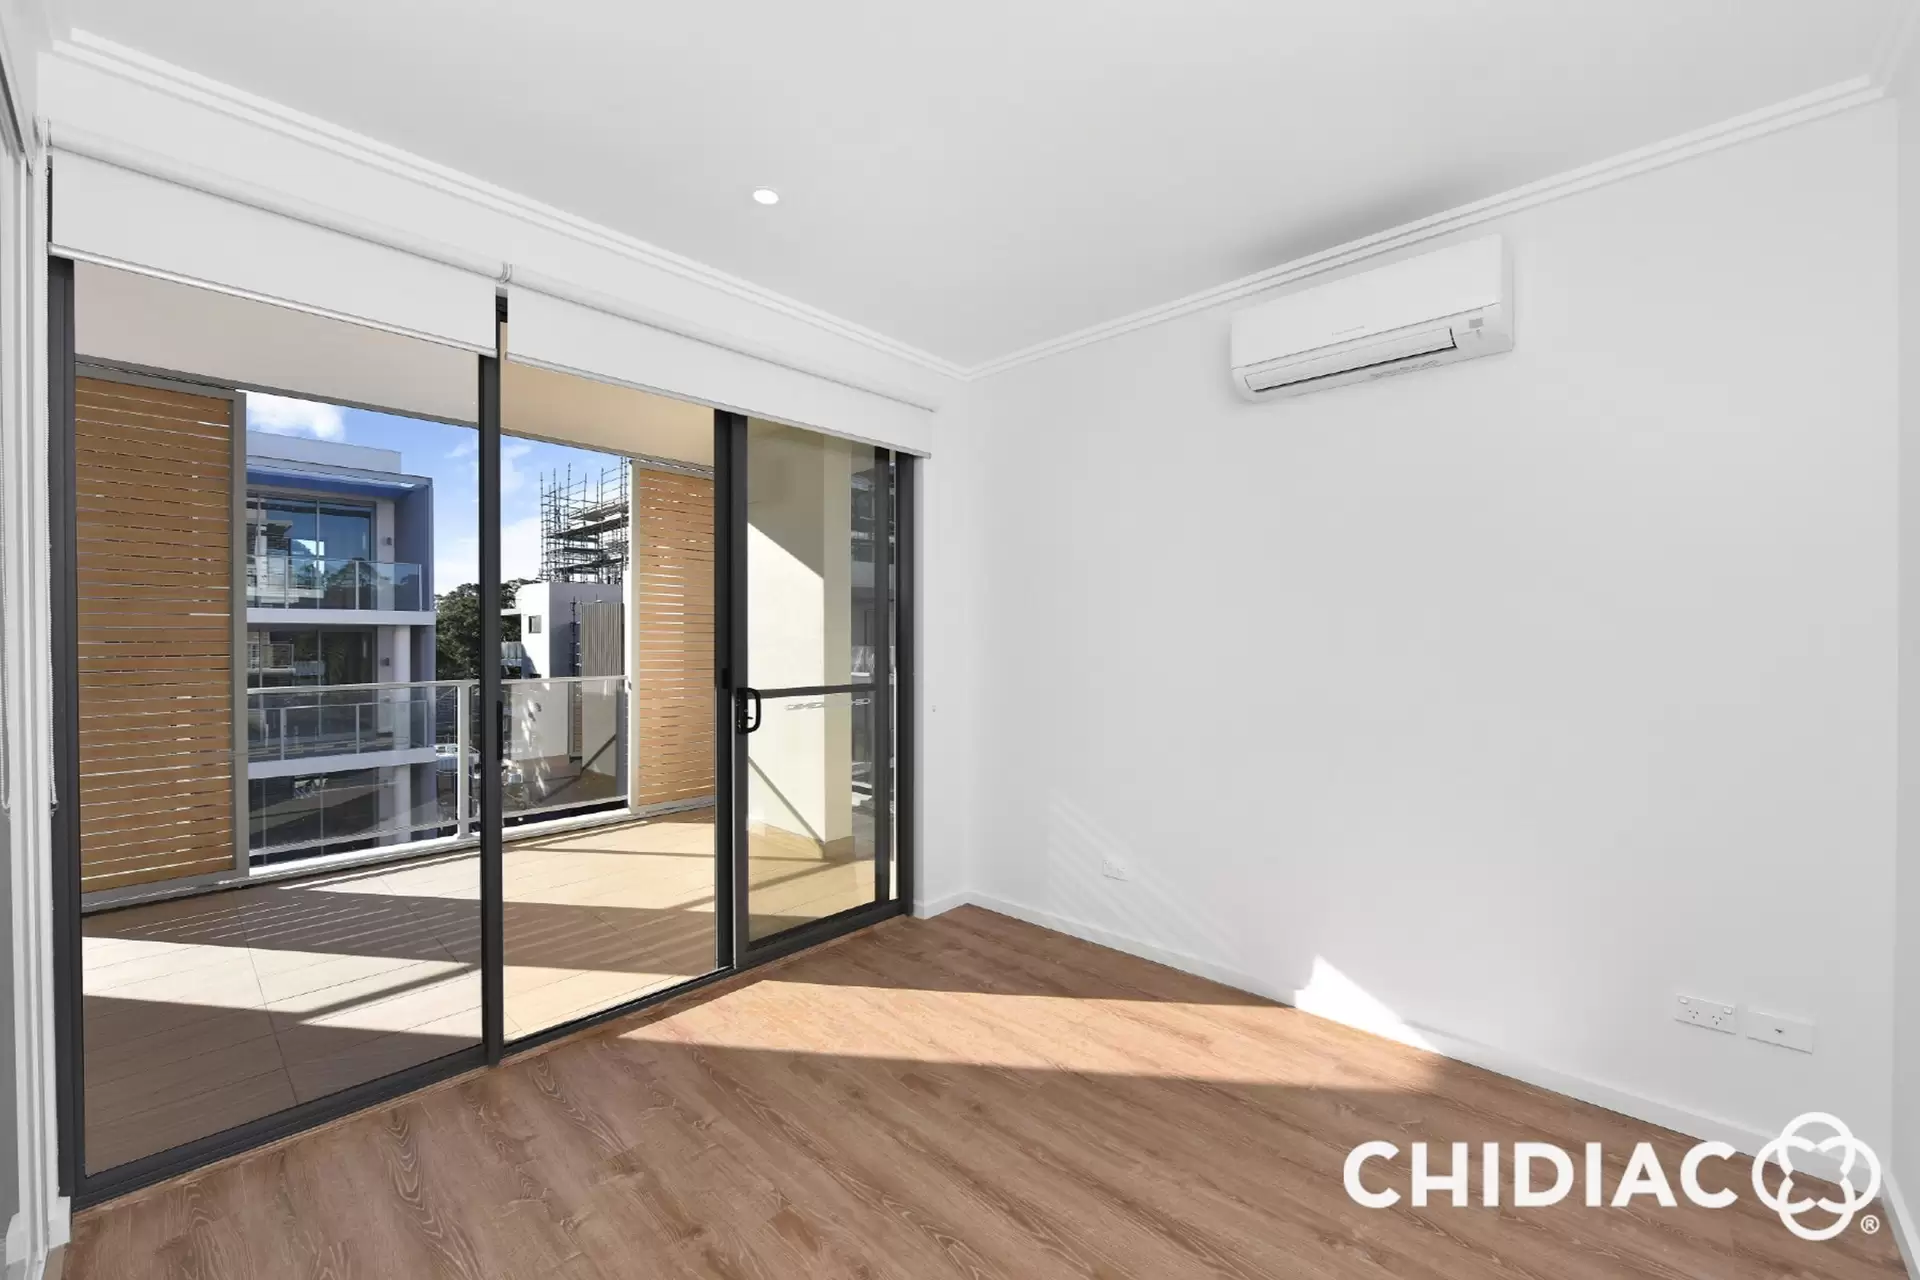 B203/18-22 Carlingford Road, Epping Leased by Chidiac Realty - image 1